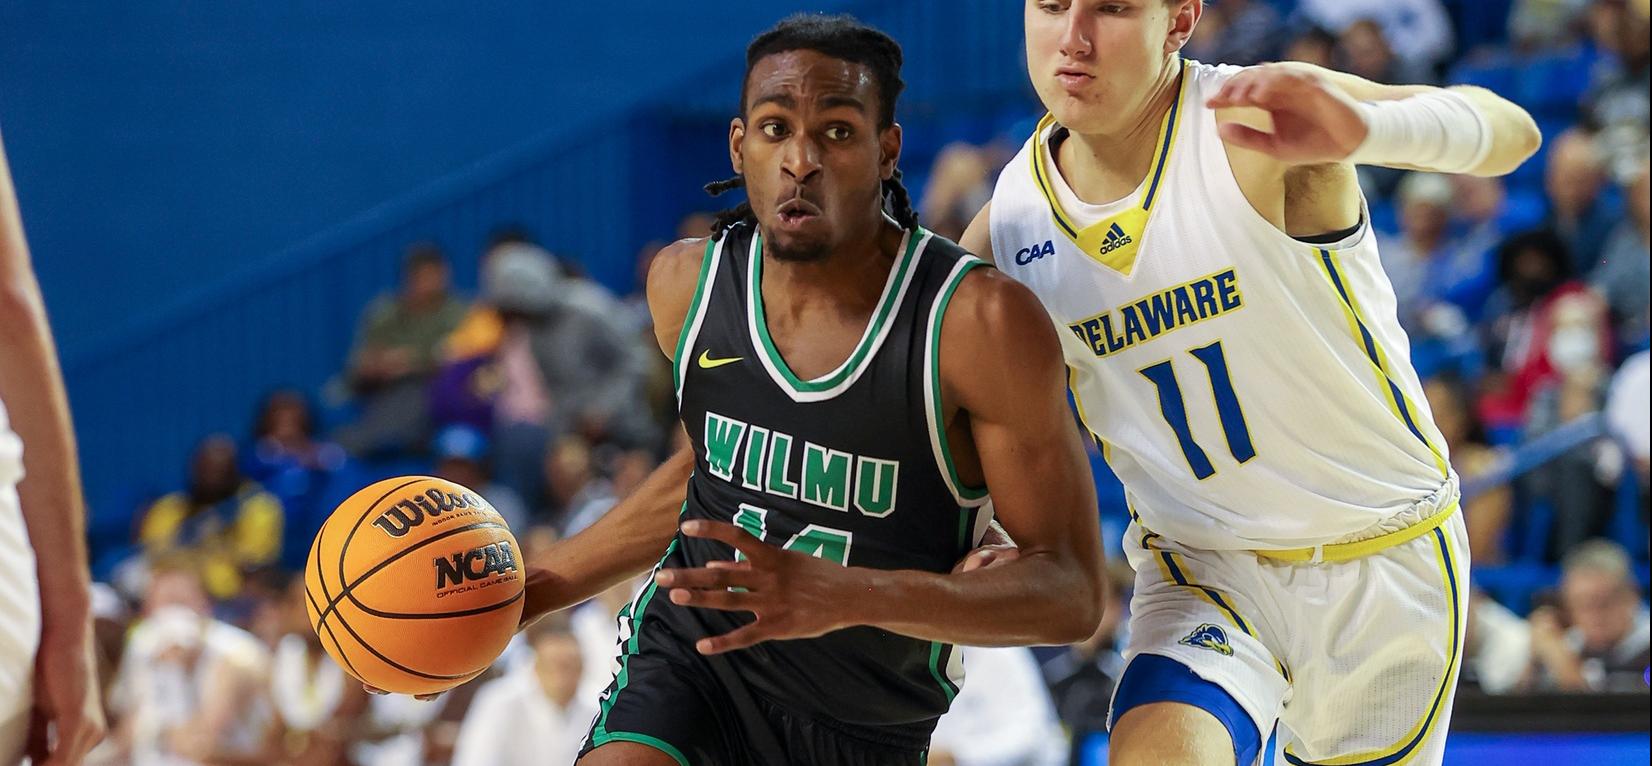 File photo of Justin Thomas who scored a game high 19 points at Chestnut Hill. Copyright 2022; Wilmington University. All rights reserved. Photo by Andre Smith. November 7, 2022 at University of Delaware.